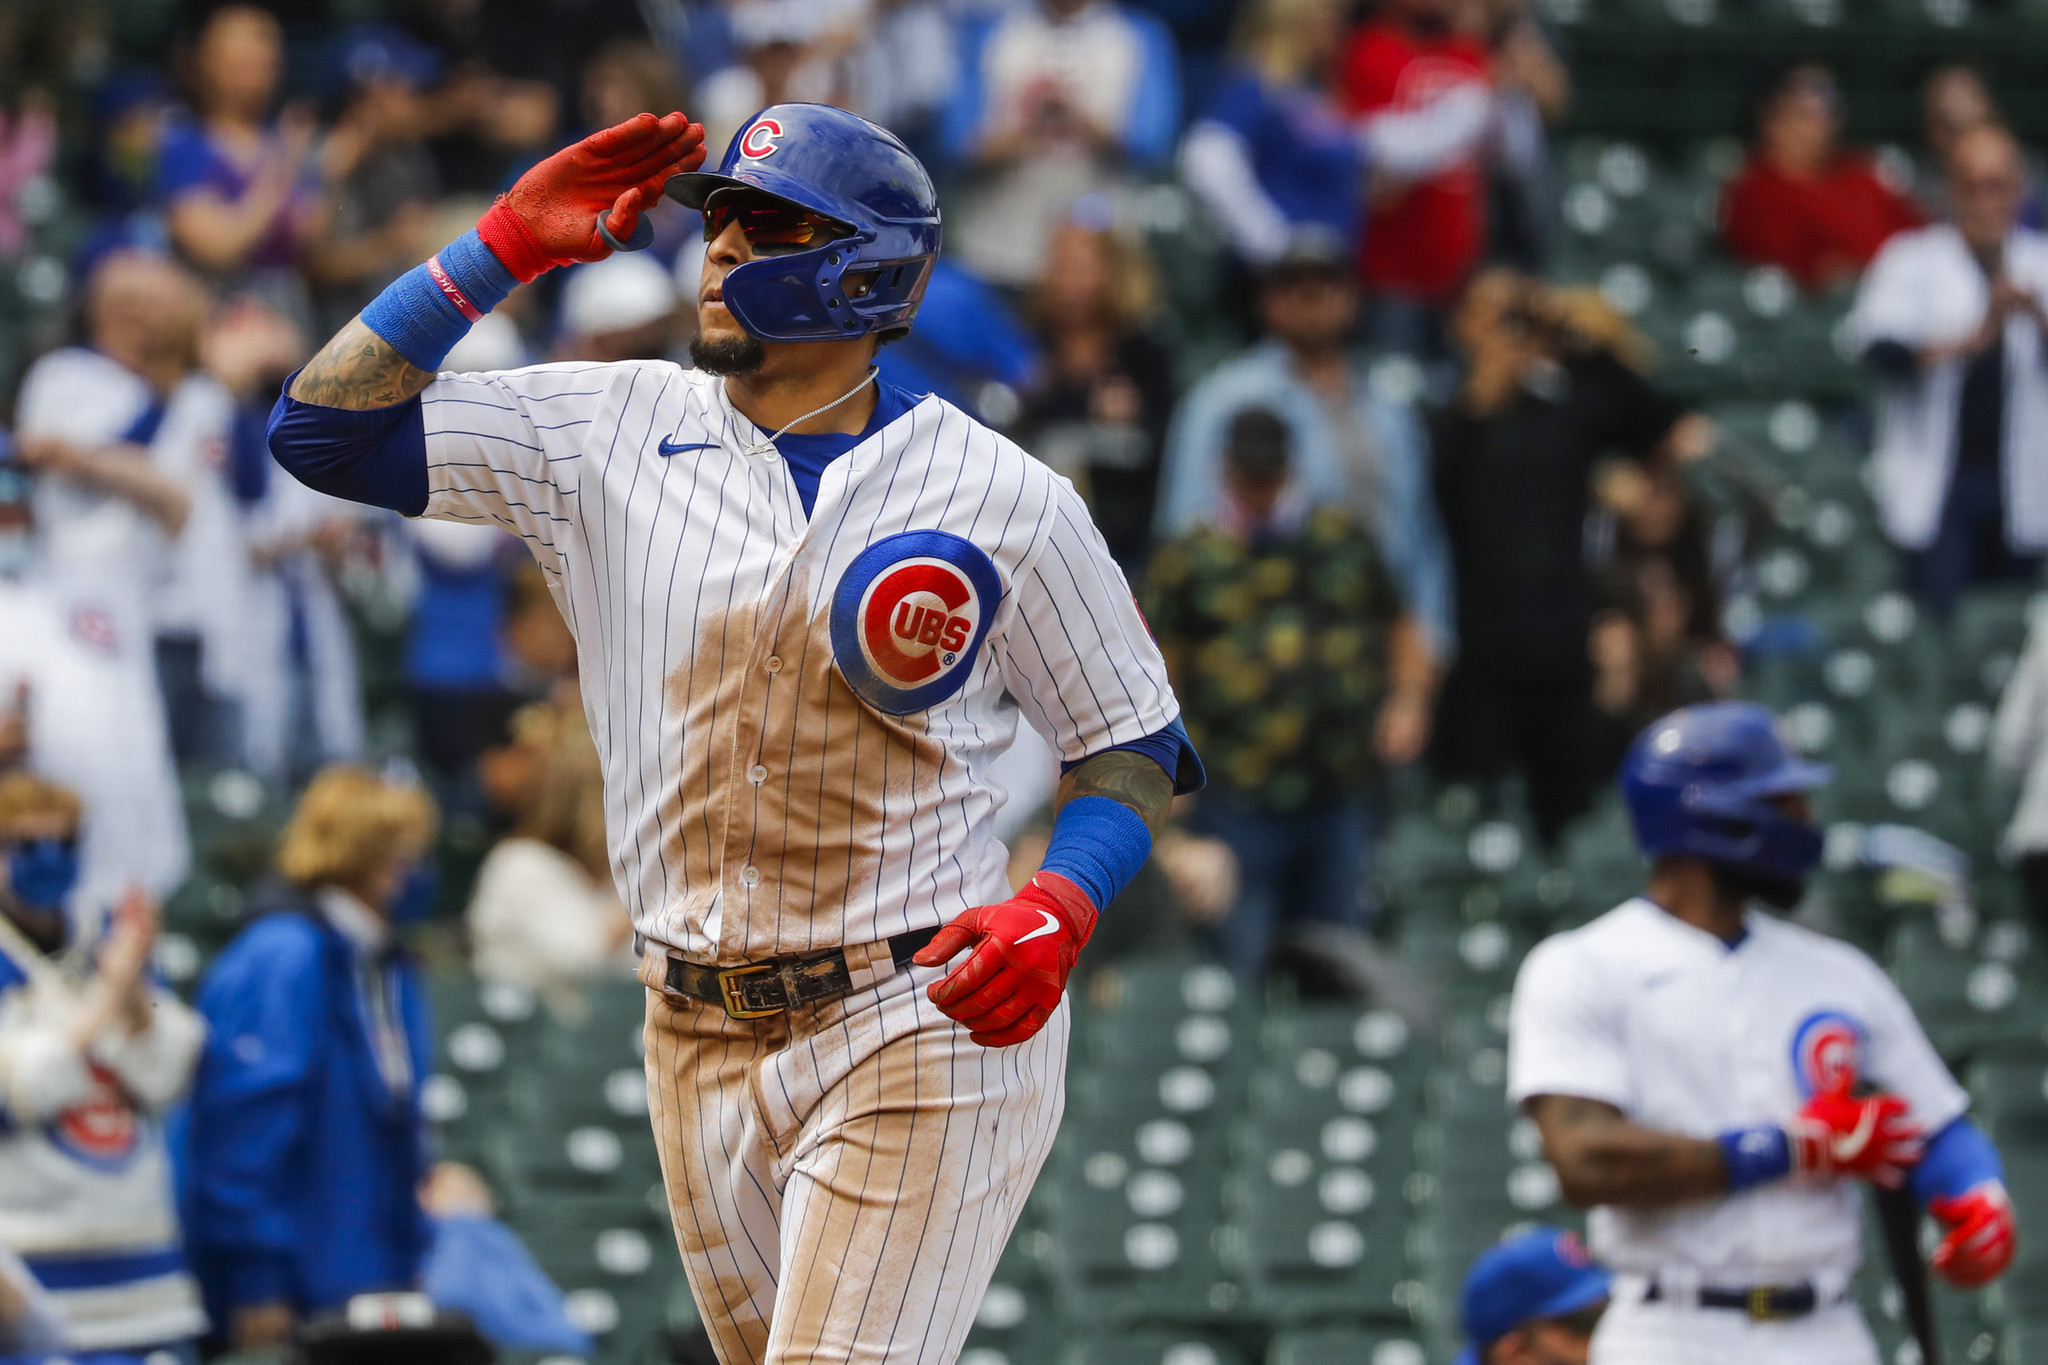 Cubs: Fame took some of the fun out of baseball for Javier Baez